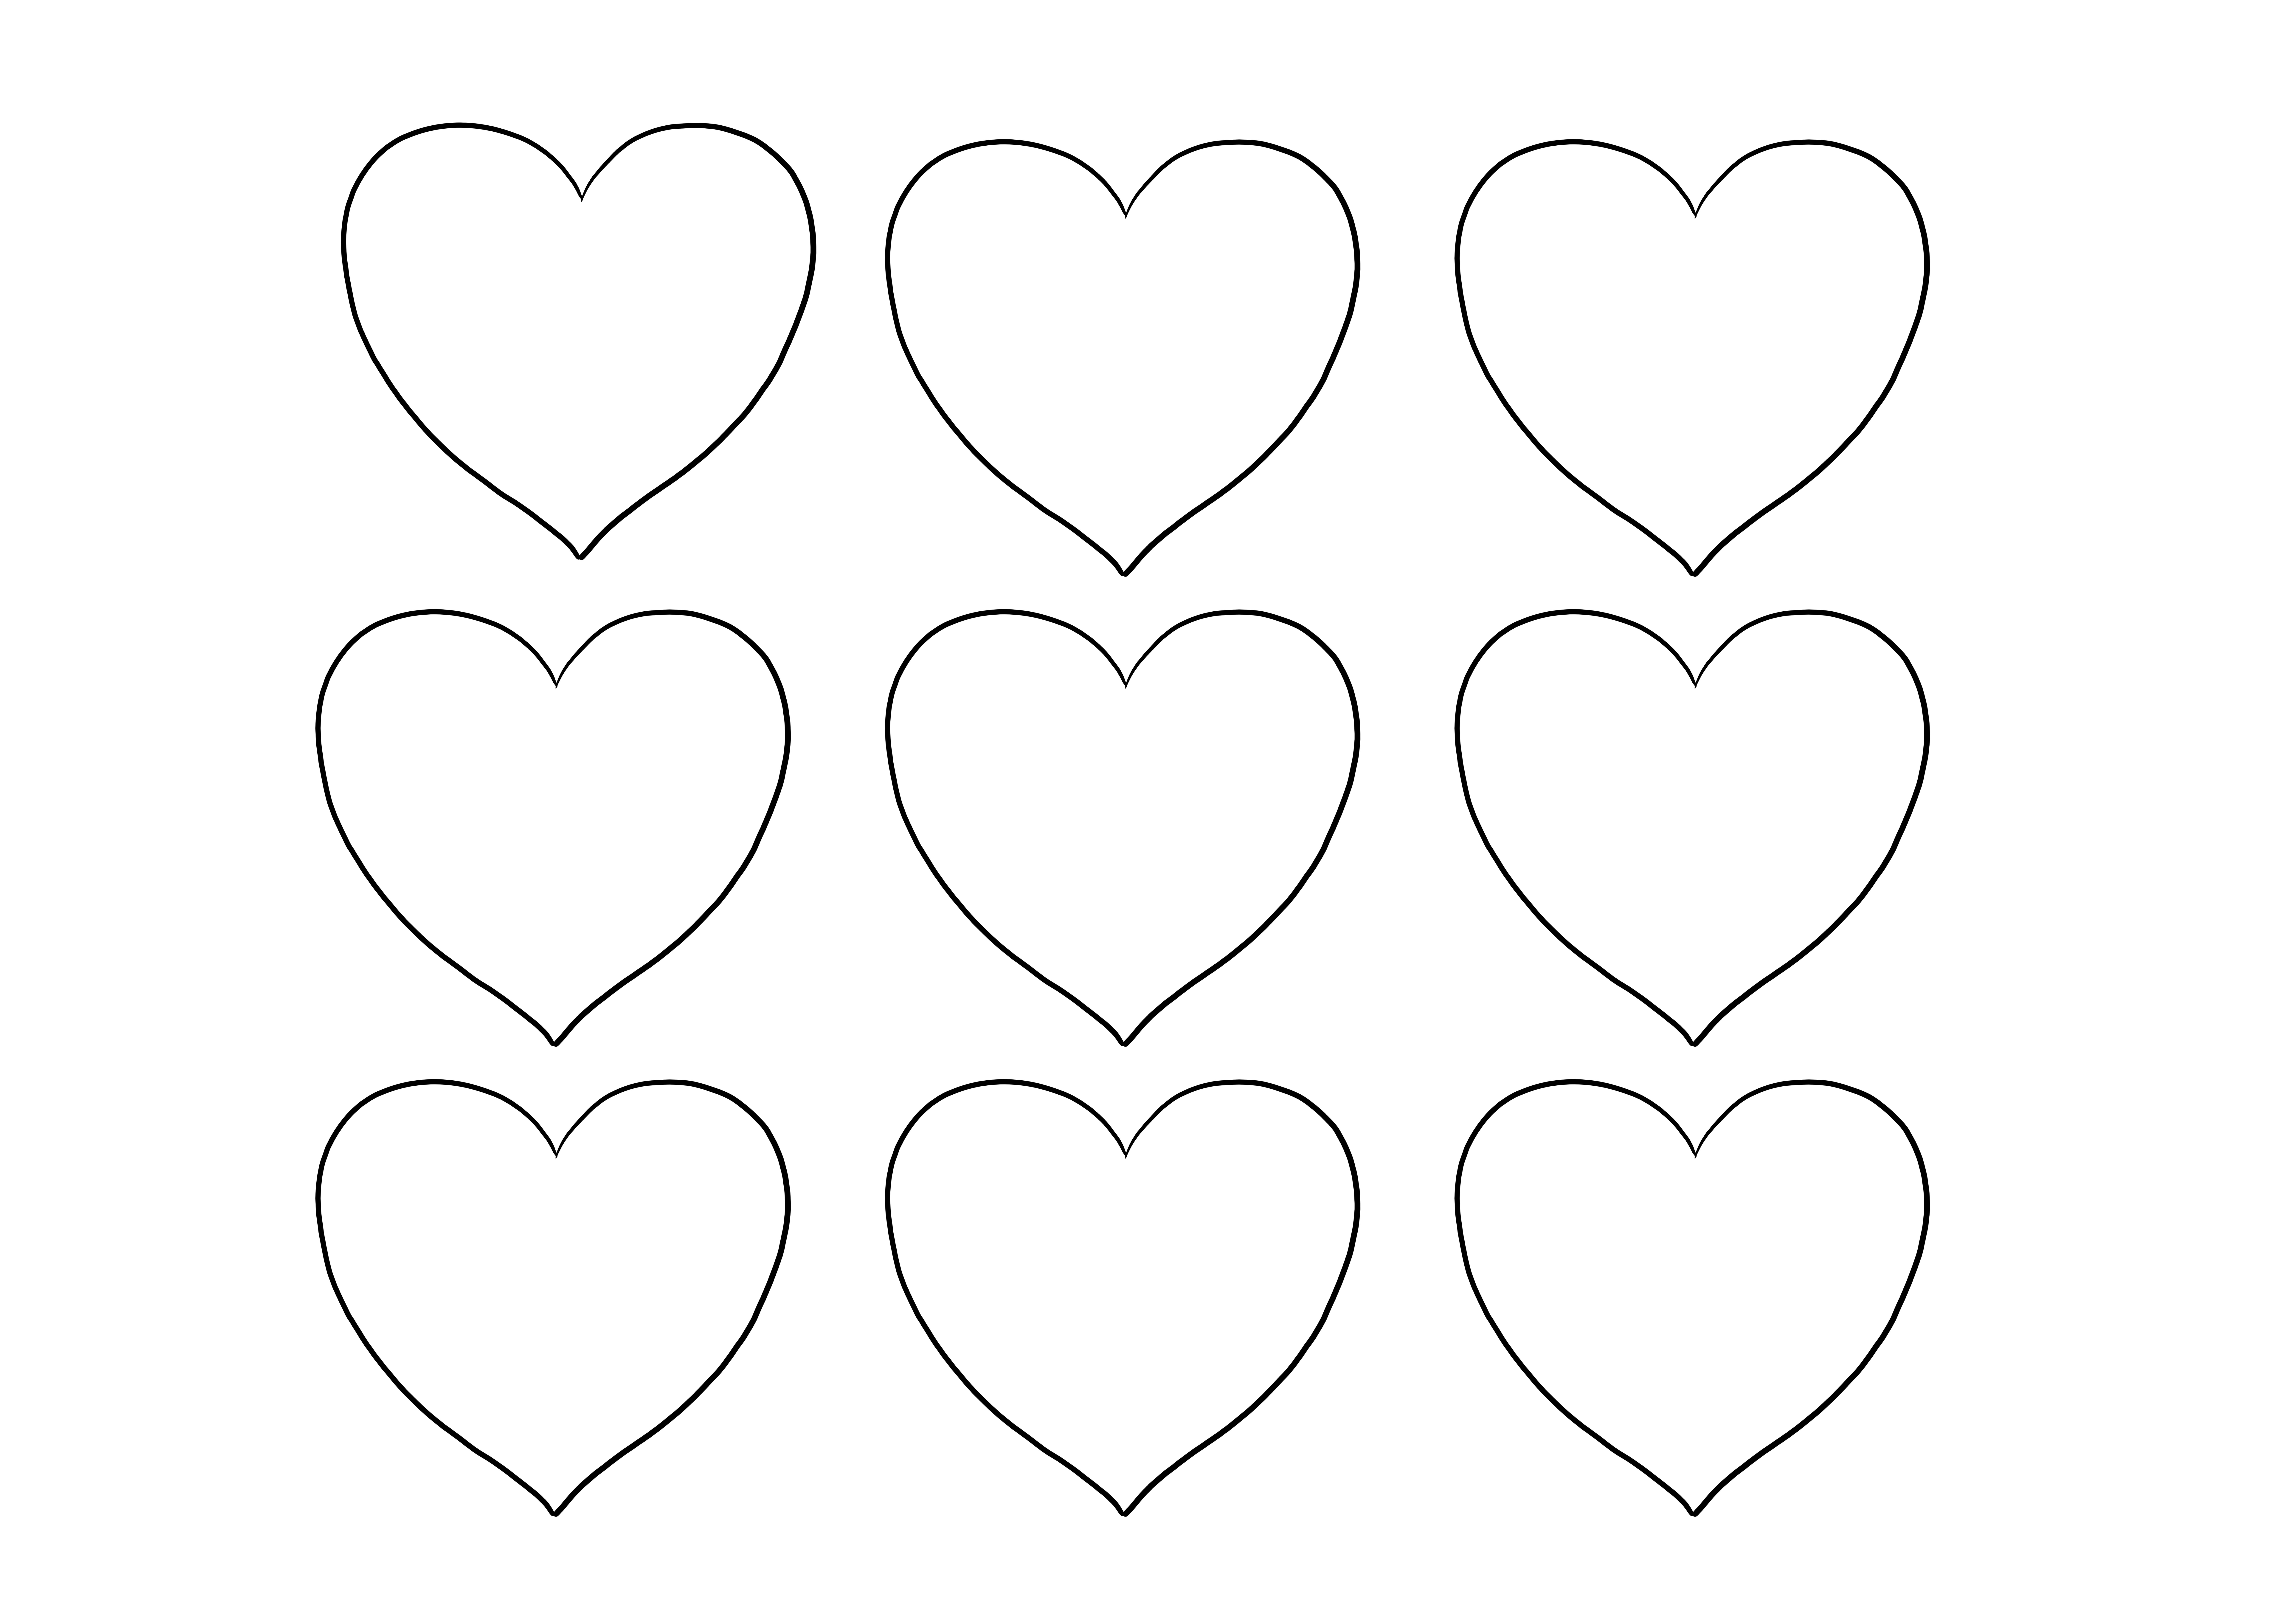 Easy coloring of Valentine's day hearts for free printing and project making